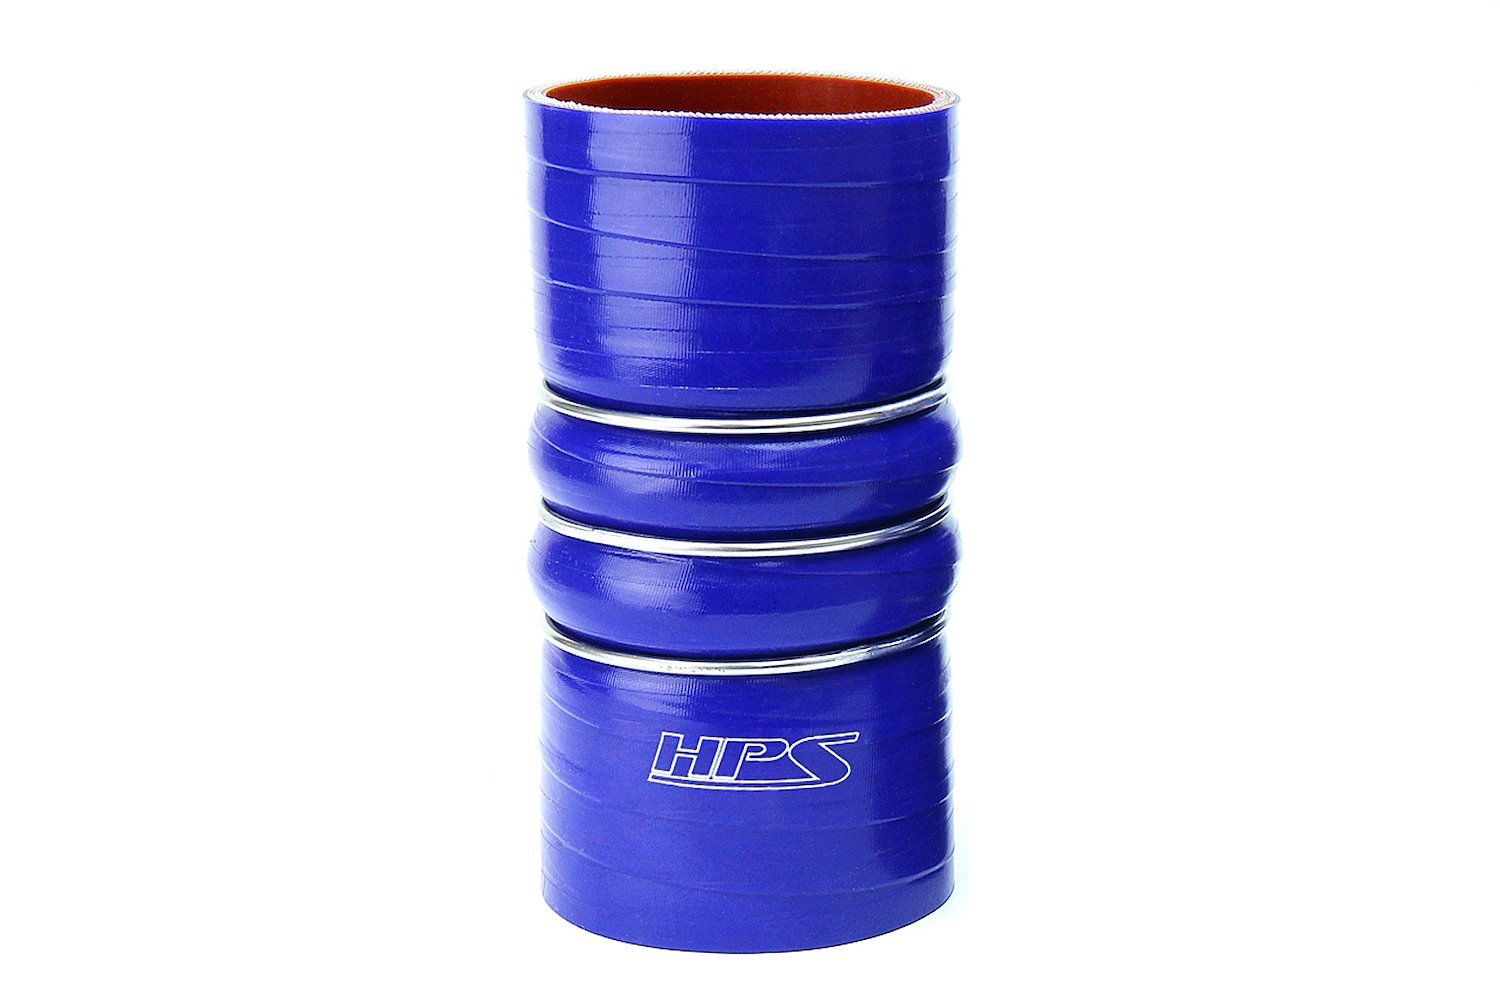 CAC-250-COLD Silicone CAC Hose, Silicone CAC Hump Coupler Hose, High-Temp 4-Ply Reinforced, 2-1/2 in. ID, 6 in. Long